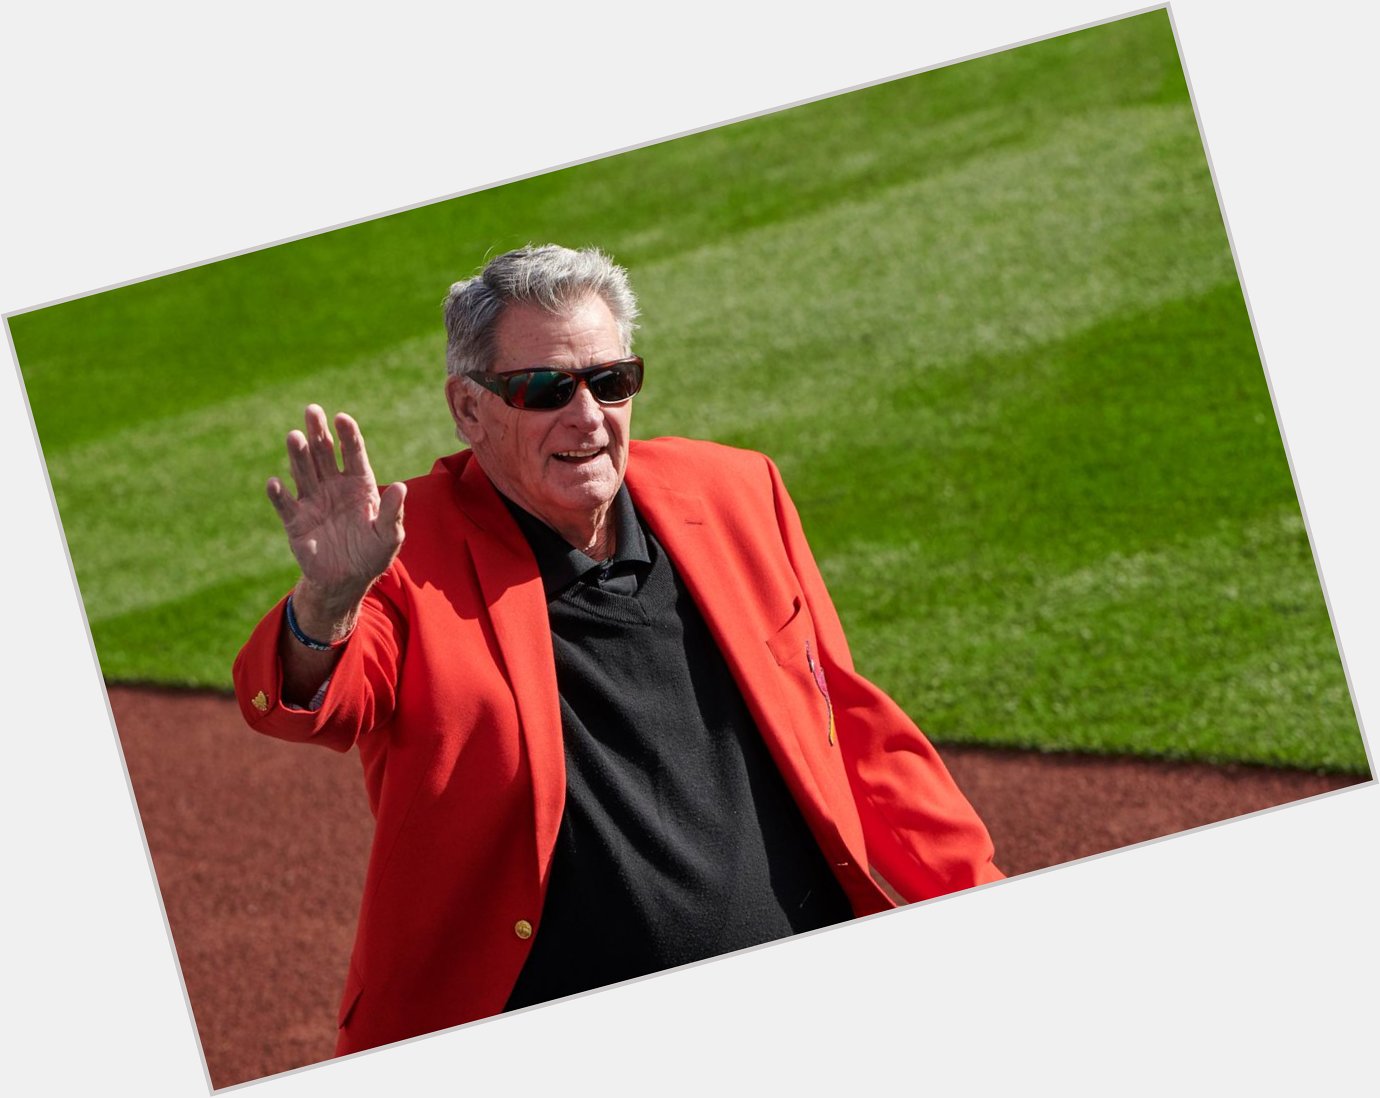 Join us in wishing a Happy 79th Birthday to member and two-time World Series Champion, Mike Shannon! 